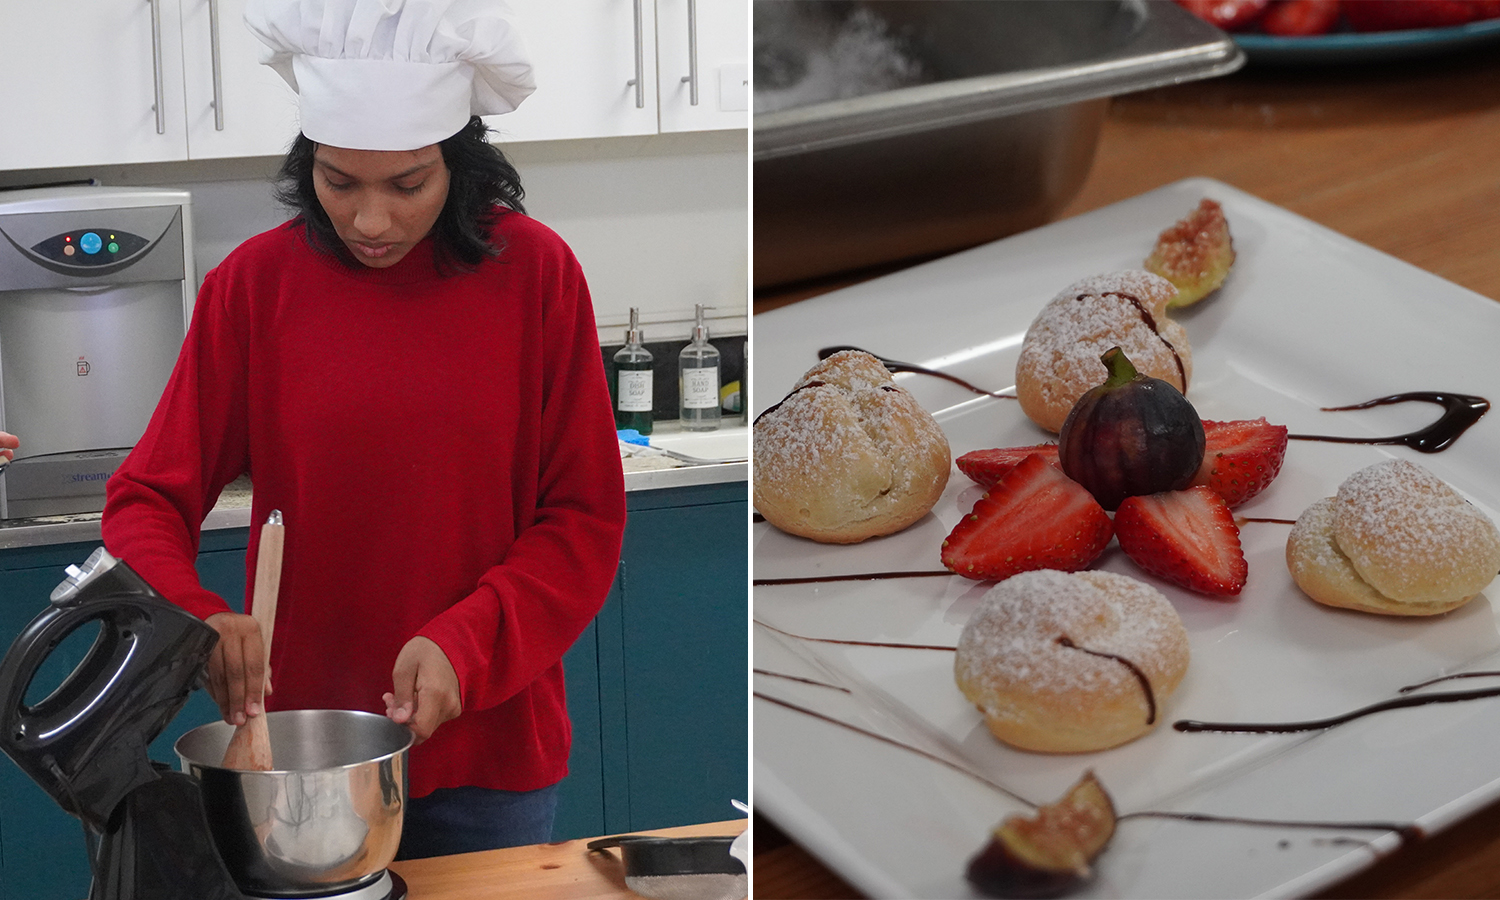 The making of Pâte à Choux and the final product of Cream Puffs plated with figs and cream.